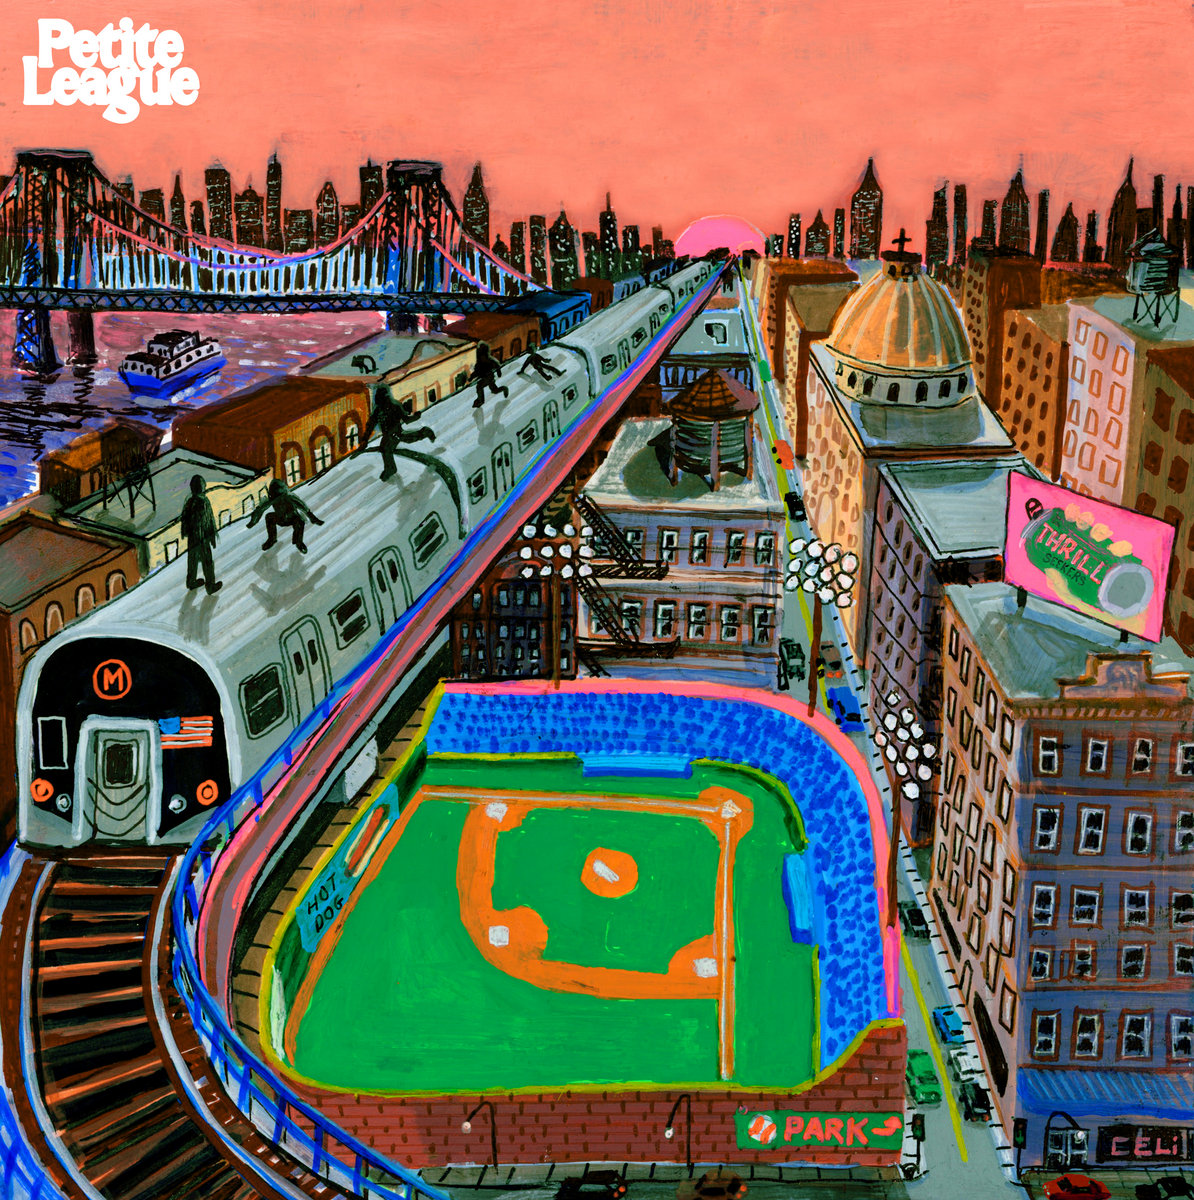 ALBUM REVIEW: Petite League Reinvents Alternative in Thrill Seekers -  B-Sides